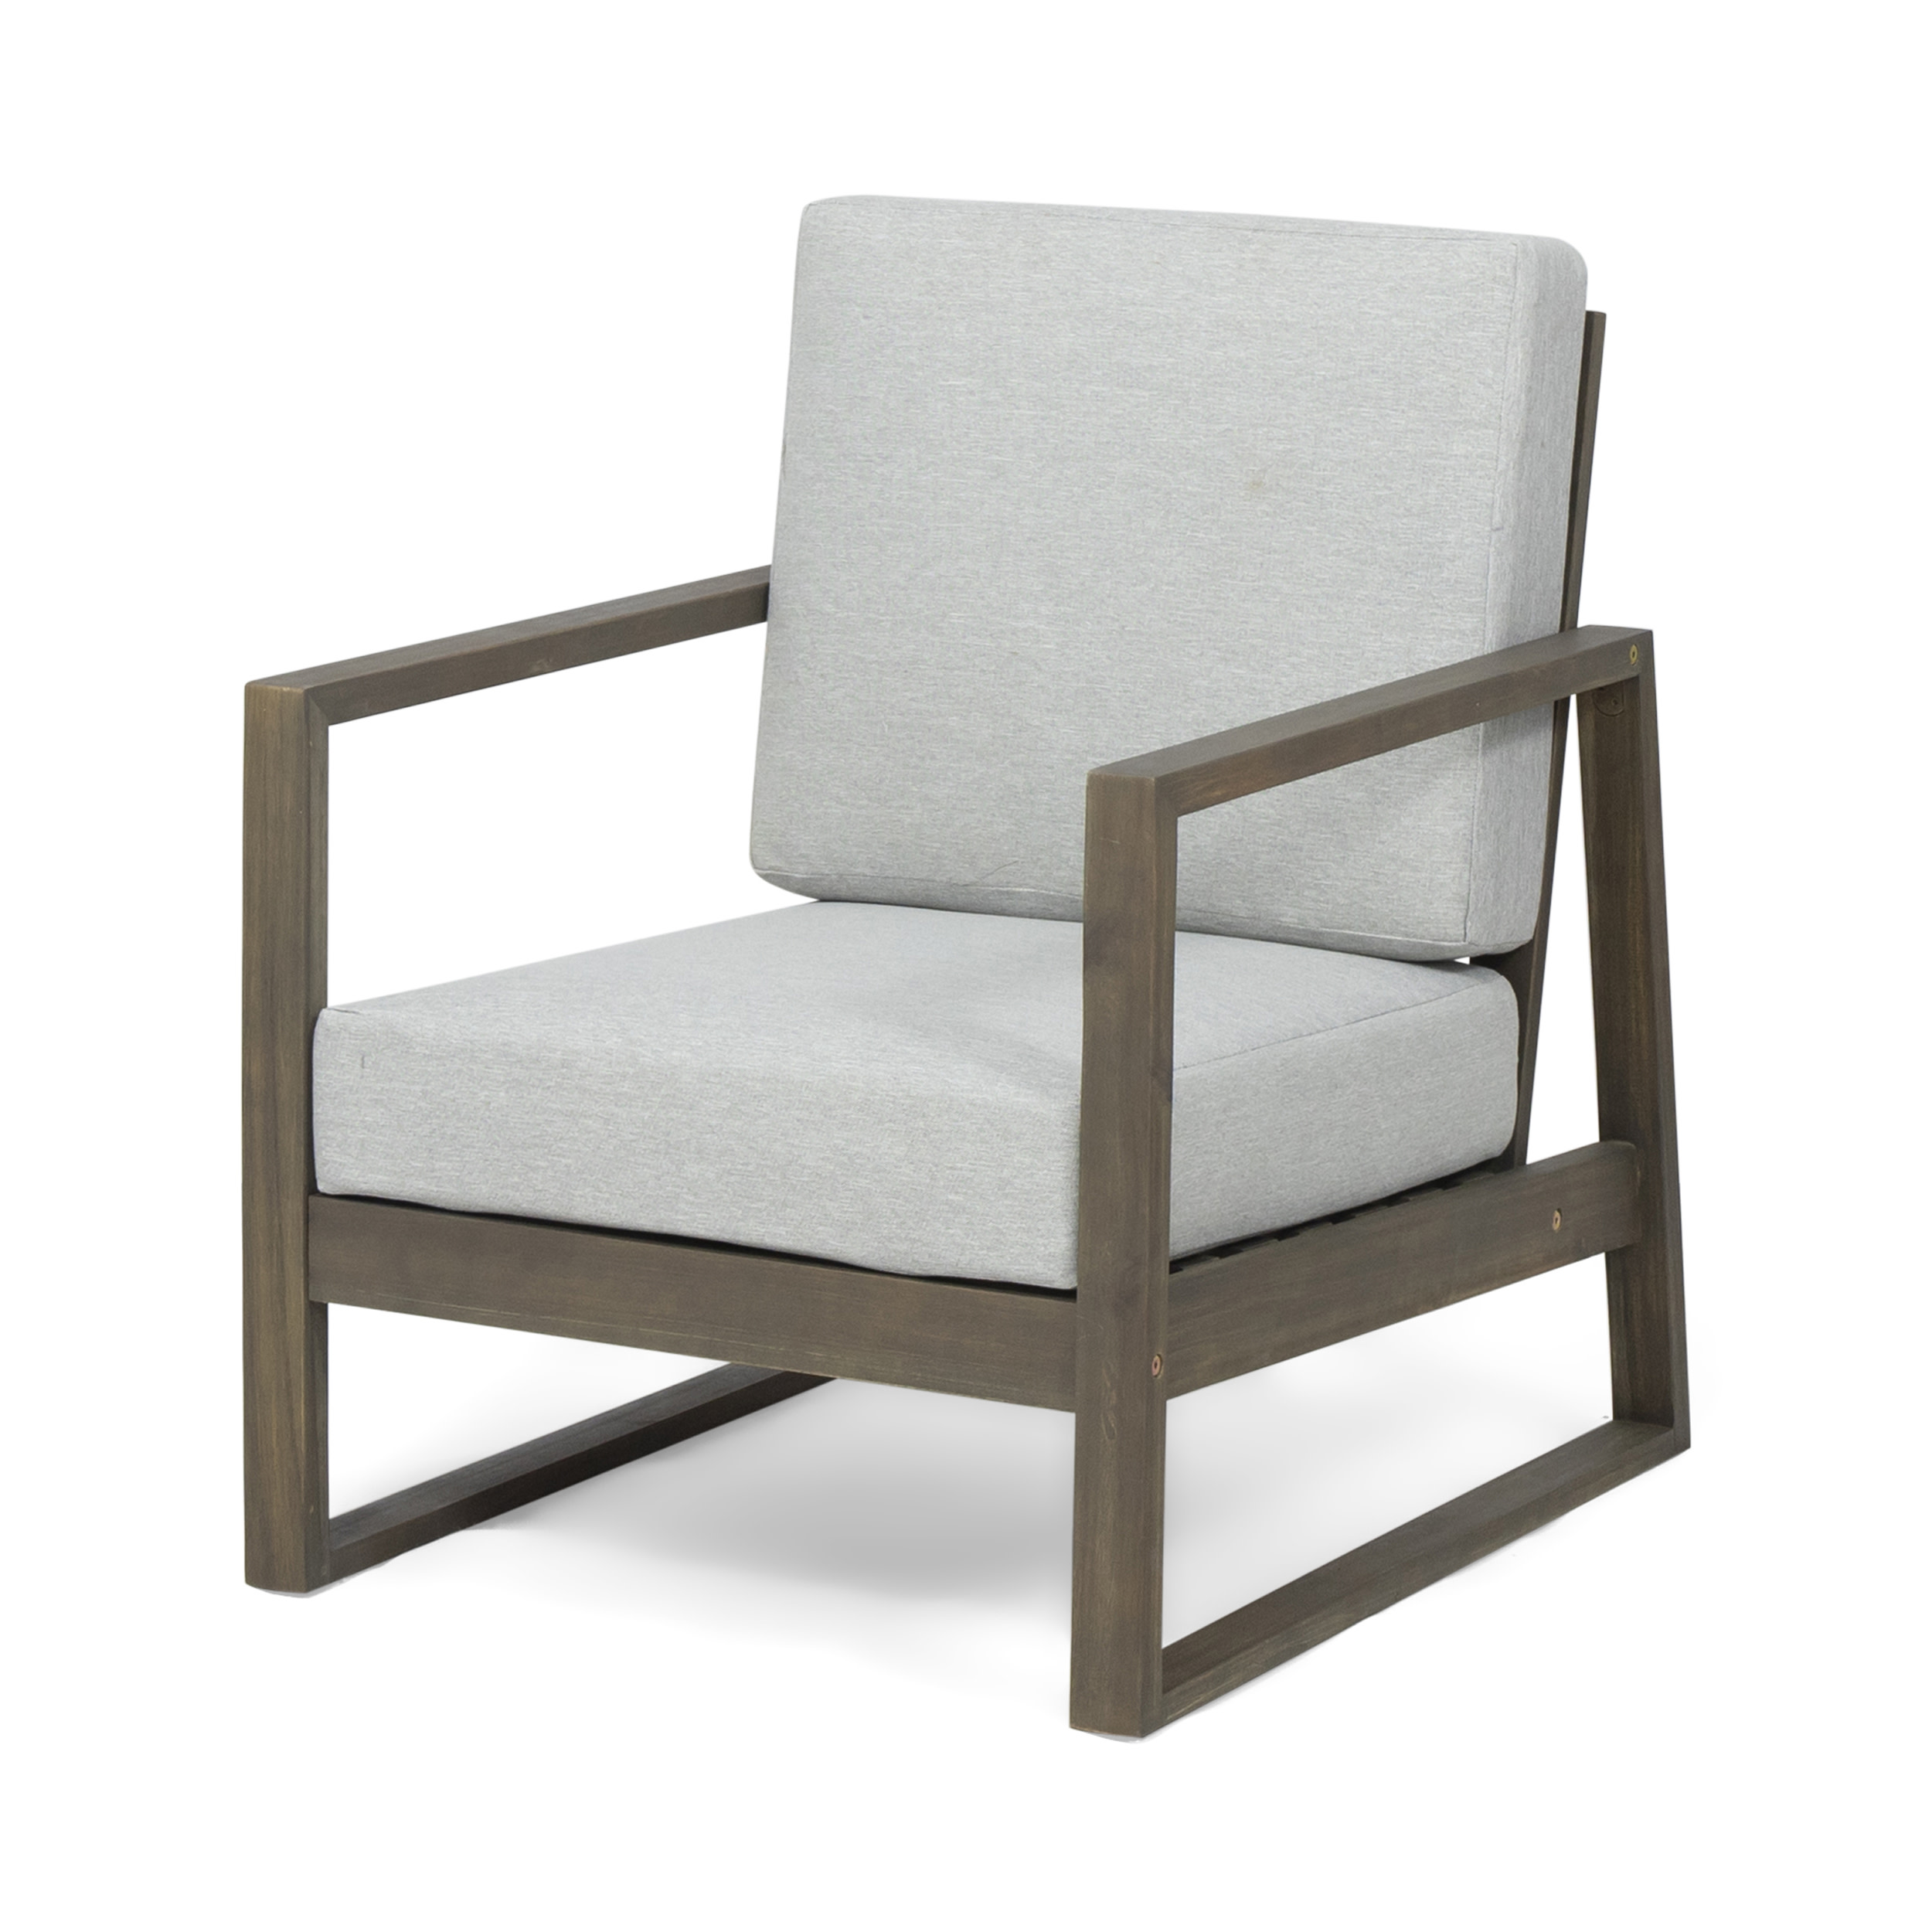 Eclipse Acacia Wood Outdoor Club Chair with Cushion, Gray and Light Gray - image 1 of 7